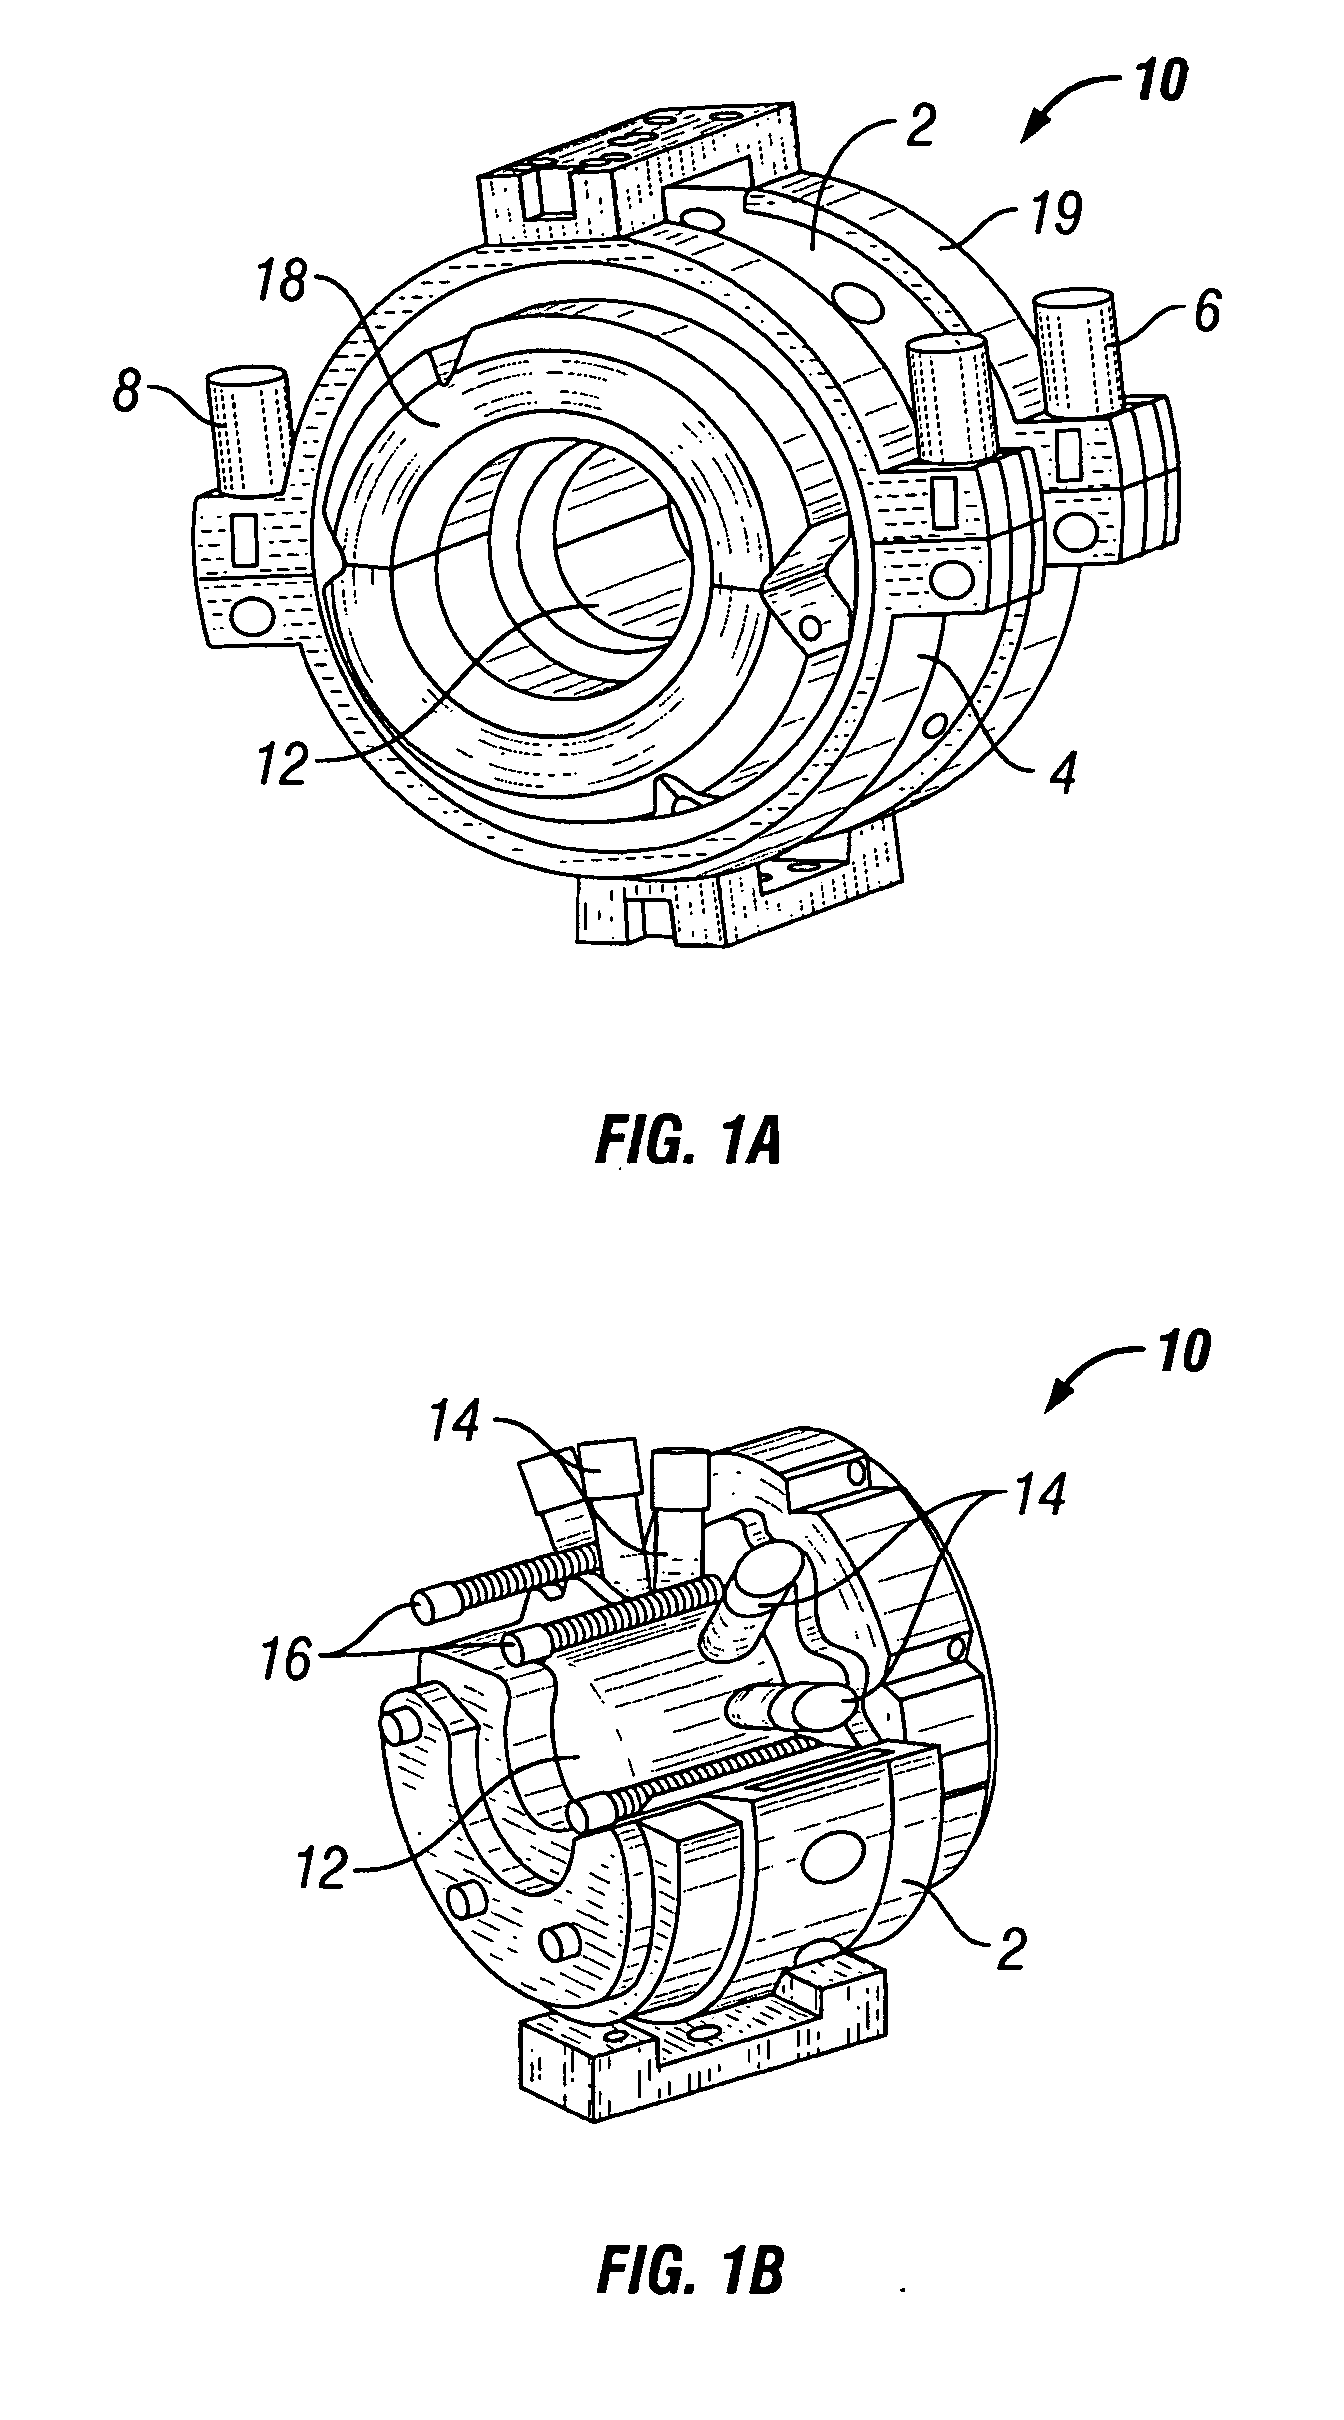 Methods of using coiled tubing inspection data